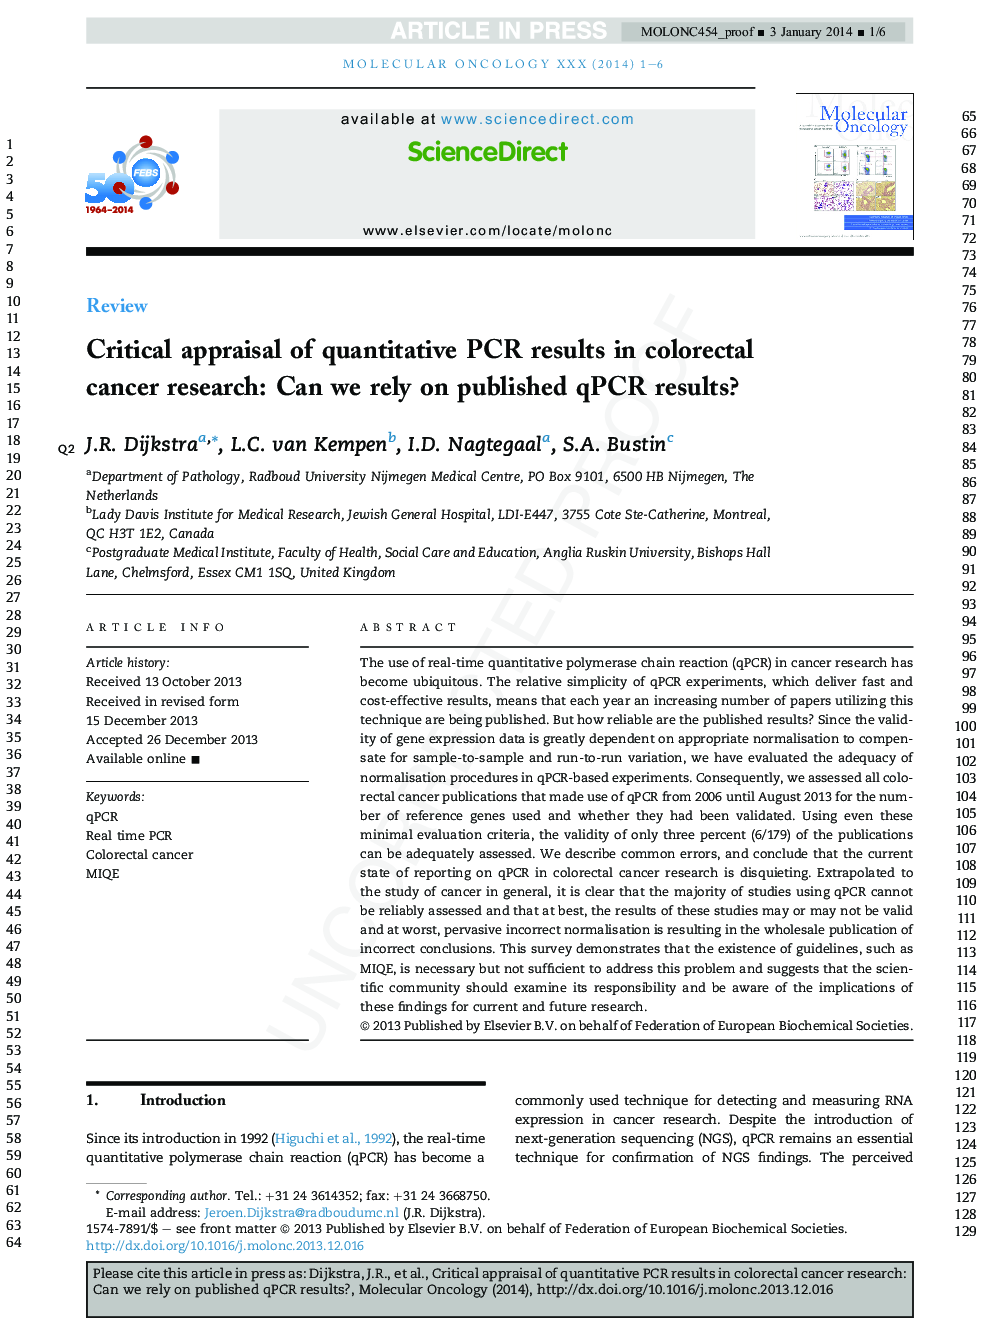 Critical appraisal of quantitative PCR results in colorectal cancer research: Can we rely on published qPCR results?